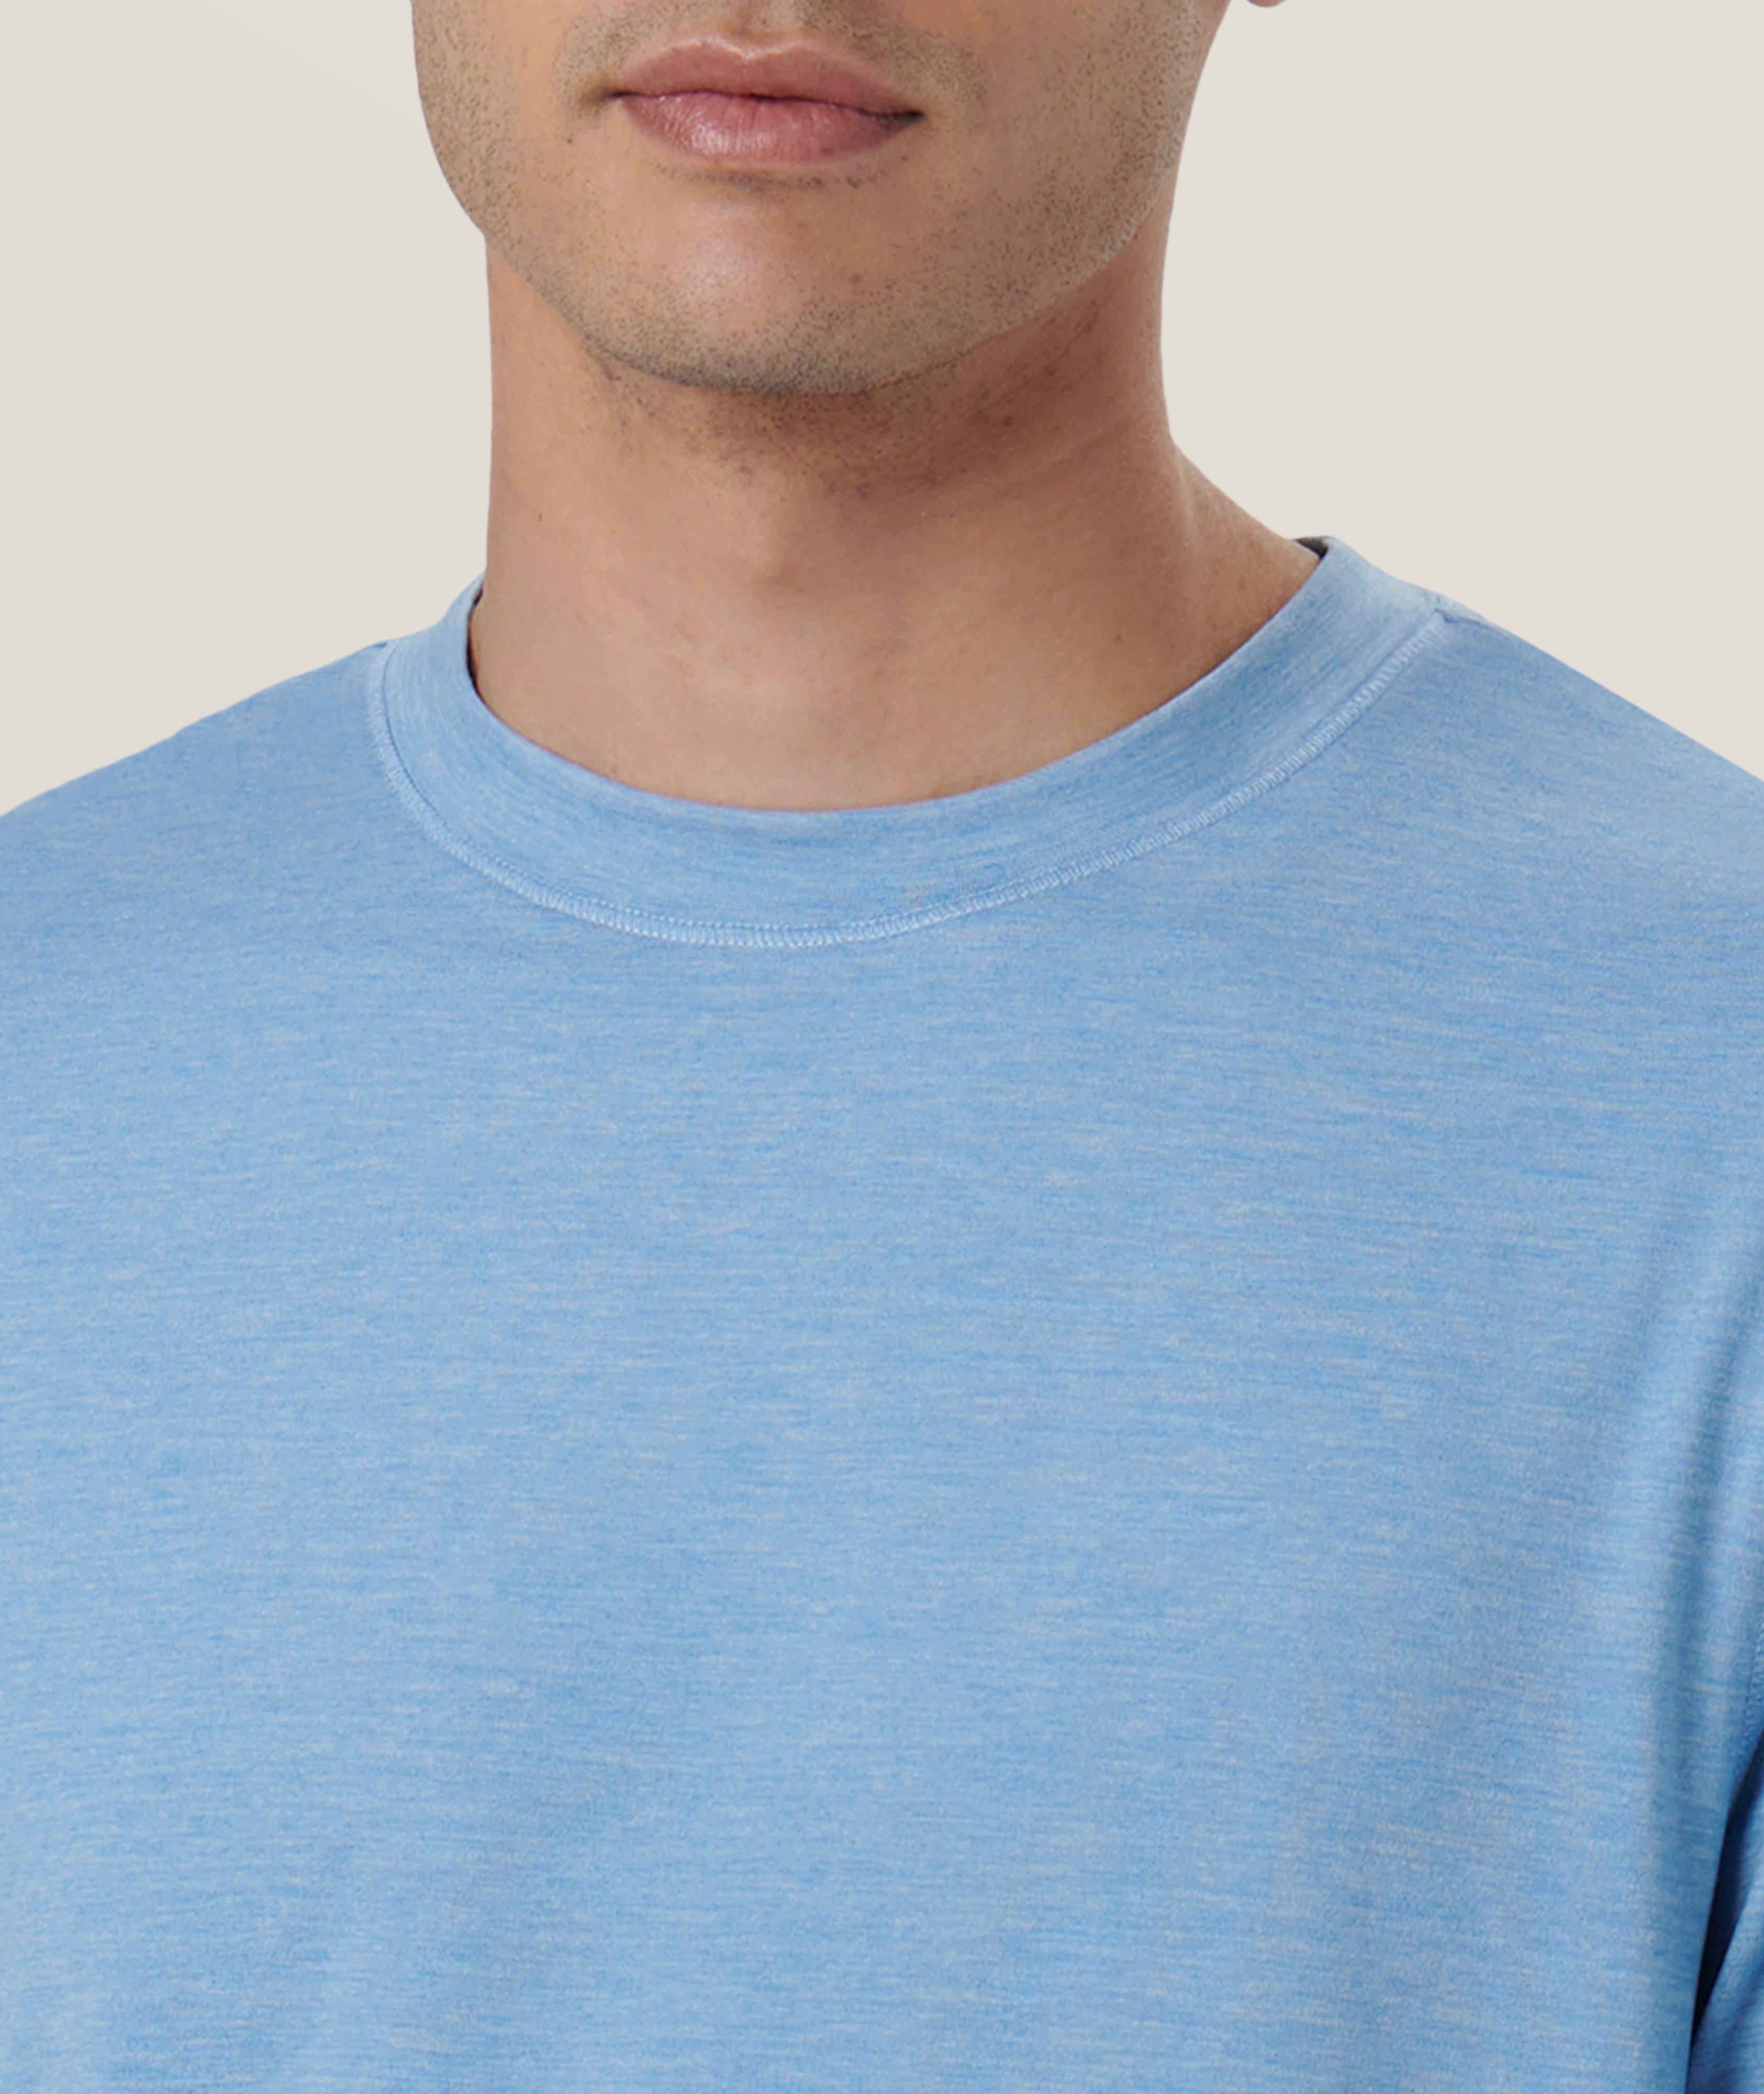 4-Way Stretch UV50 Performance Pullover image 1